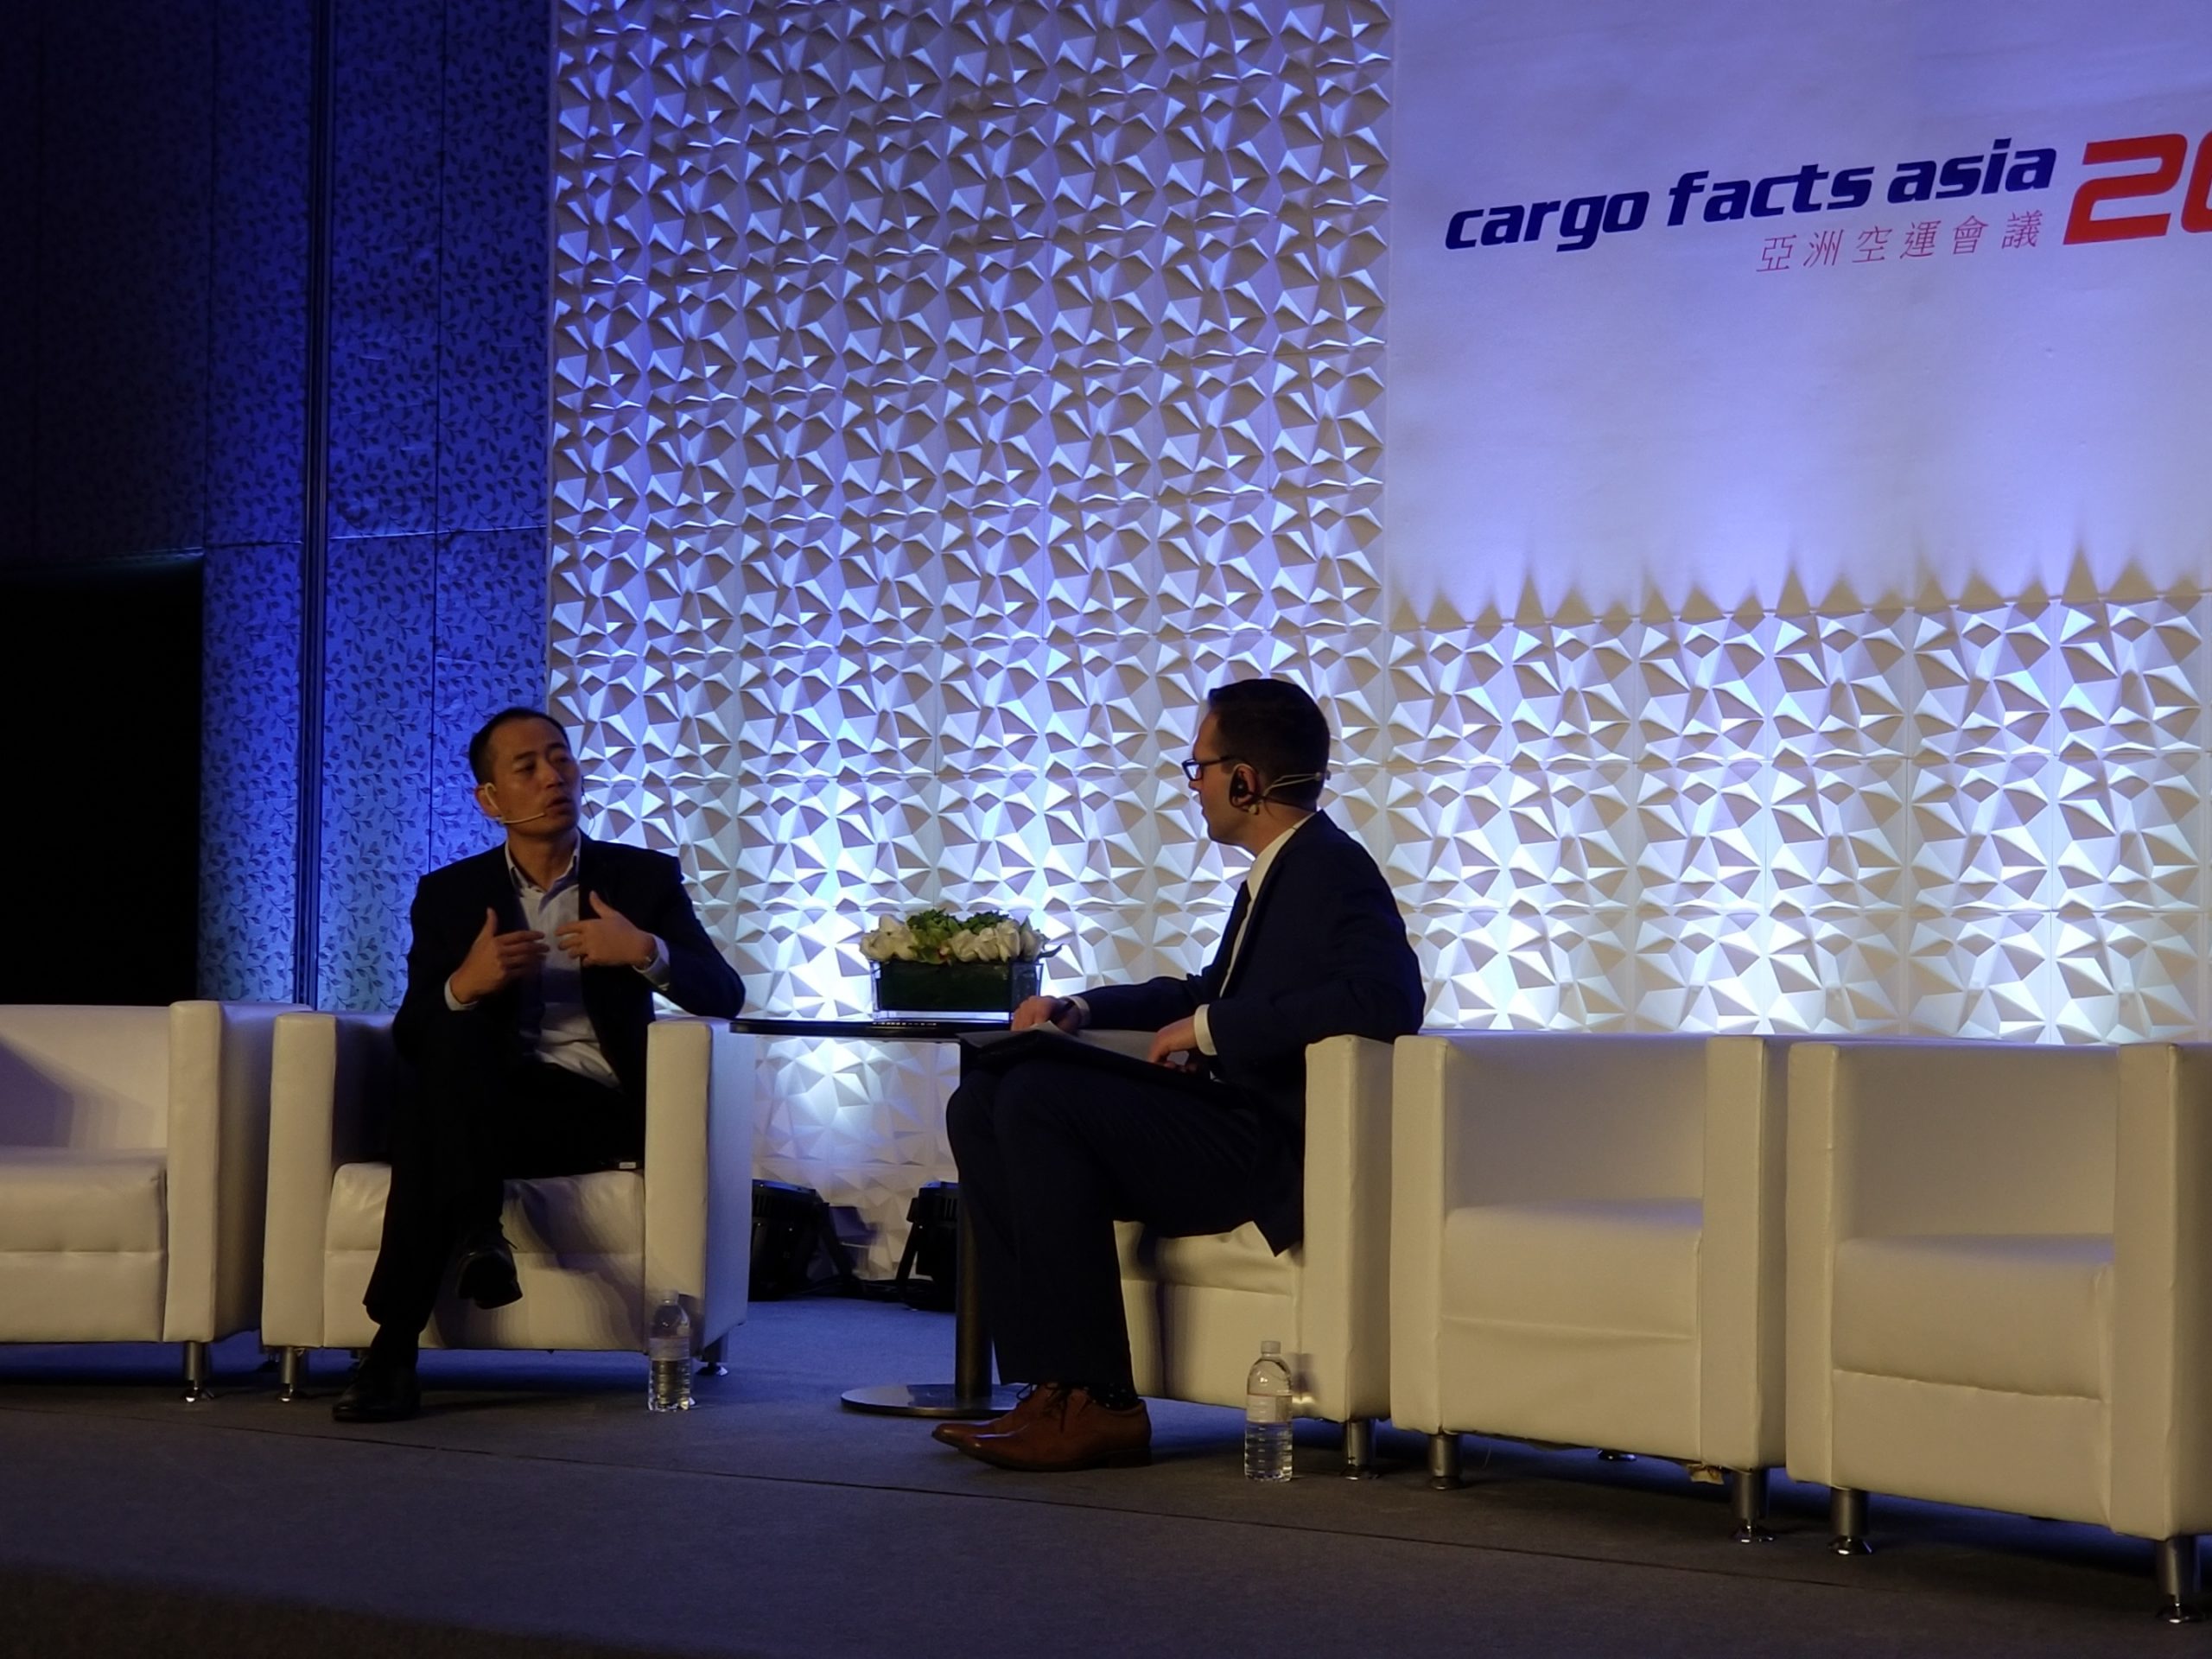 Stard Huang, President of International Business, JD Logistics, speaks at Cargo Facts Asia 2019 in Shanghai.